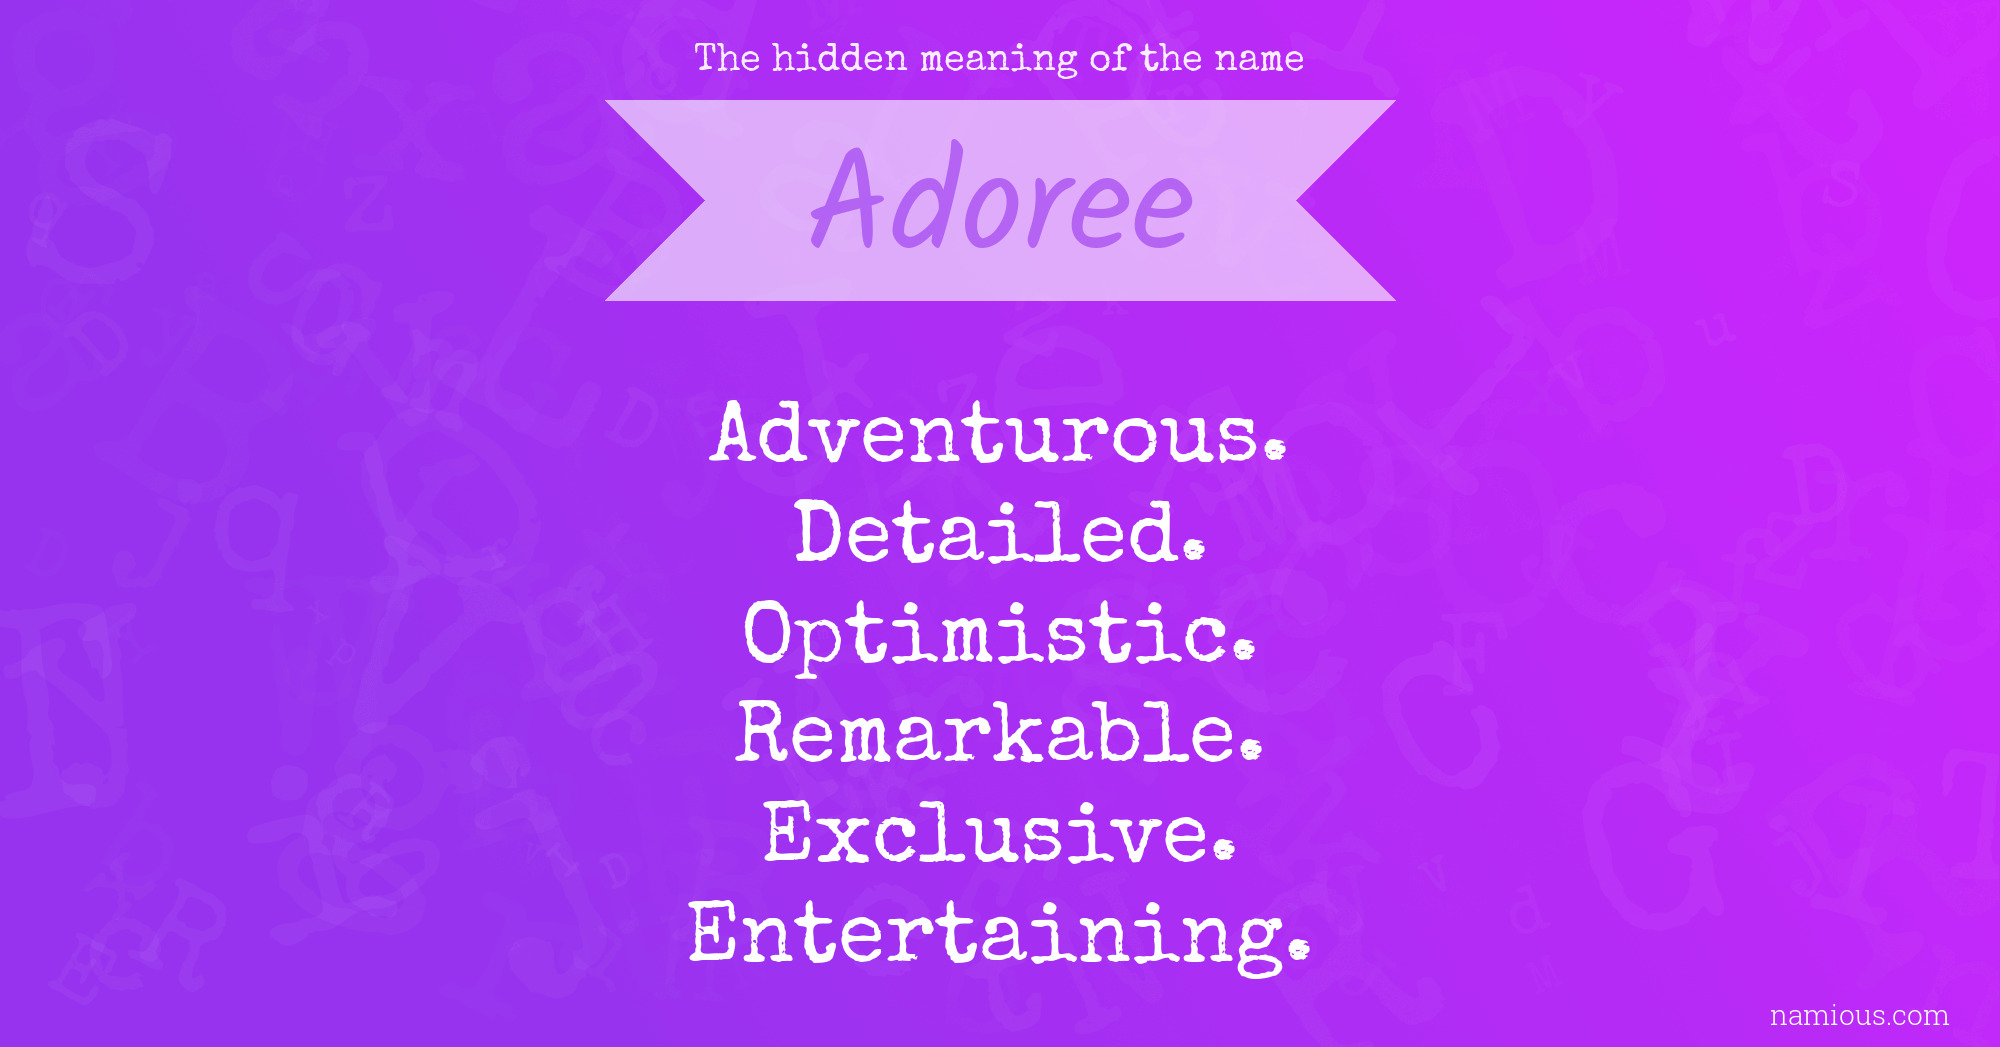 The hidden meaning of the name Adoree